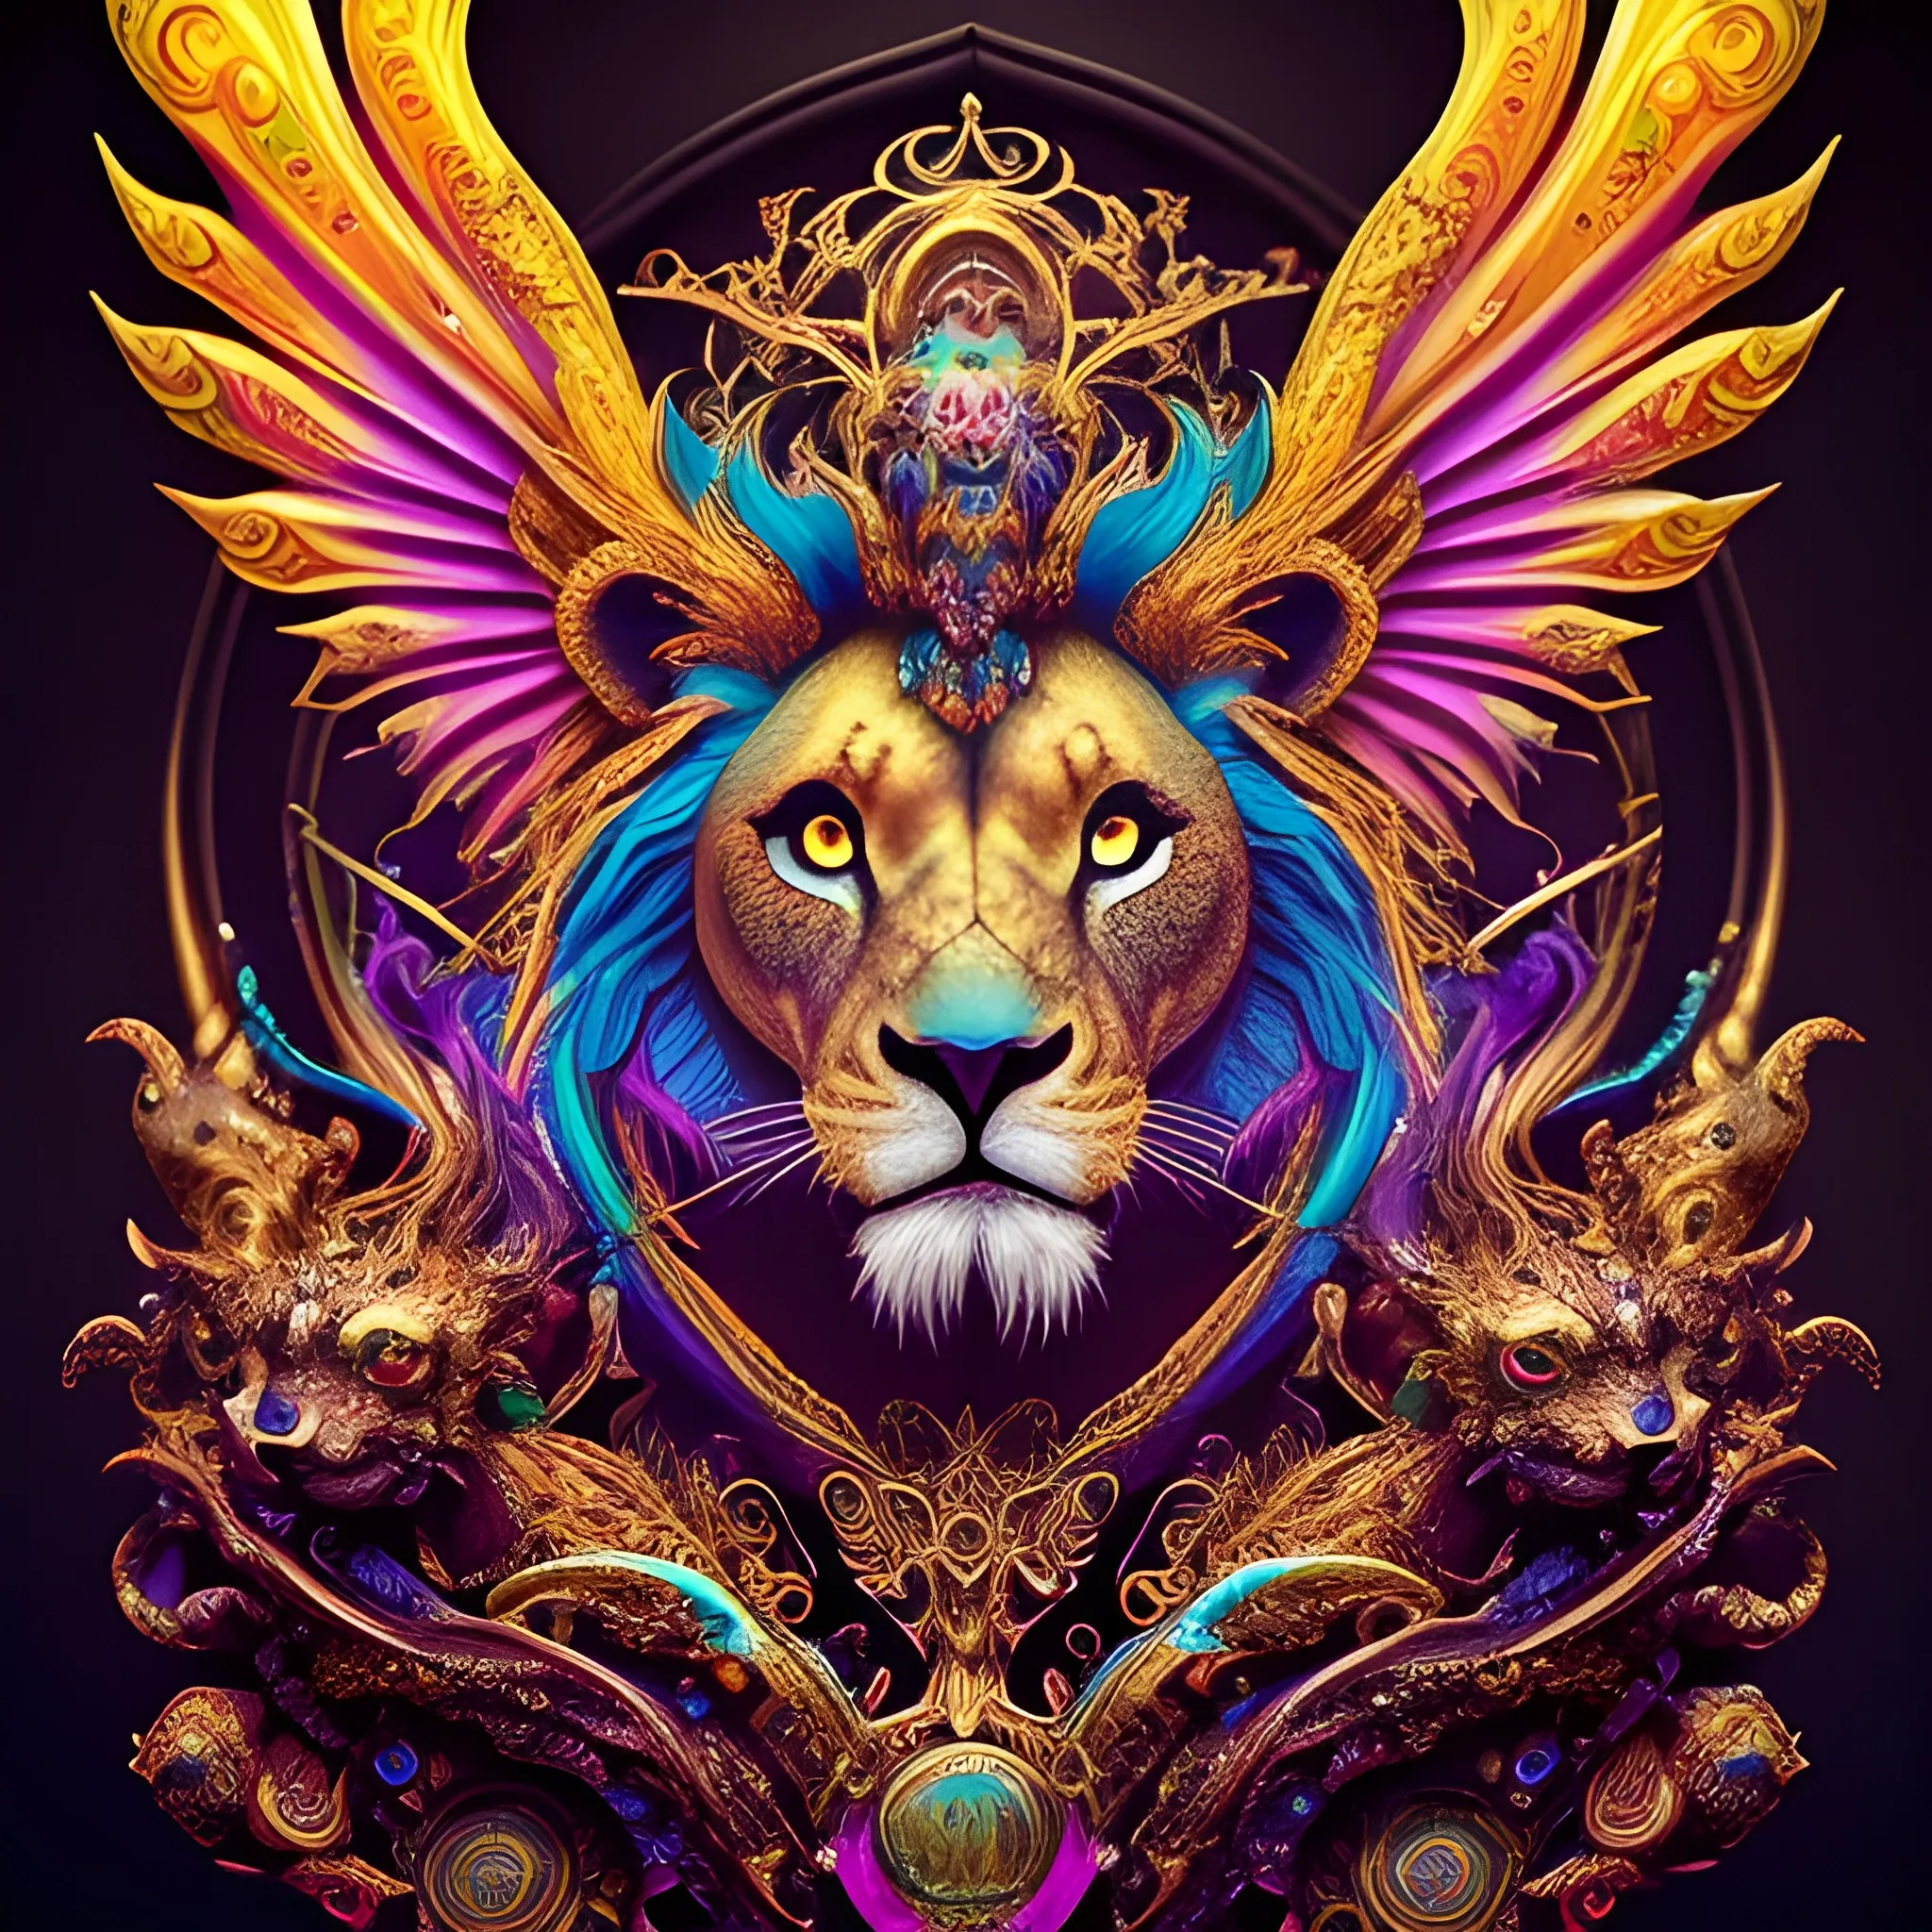 designer, the colorful  Lion head is on a black background, in the style of 8k resolution, colorful gradients, tim shumate, cute and colorful, massurrealism, magipunk,
charming characters, black background, fire psychedelic, cute eyes, dragon wings, bear claws, peacock feathers, filigree laser fractal details, glistening shiny scales, intricate ornate hypermaximalist sharp focus, dramatic lighting, highly detailed and intricate, hyper maximalist, ornate, photographic style, luxury, elite, haunting matte painting, cinematic, Trippy, 3D, 3D